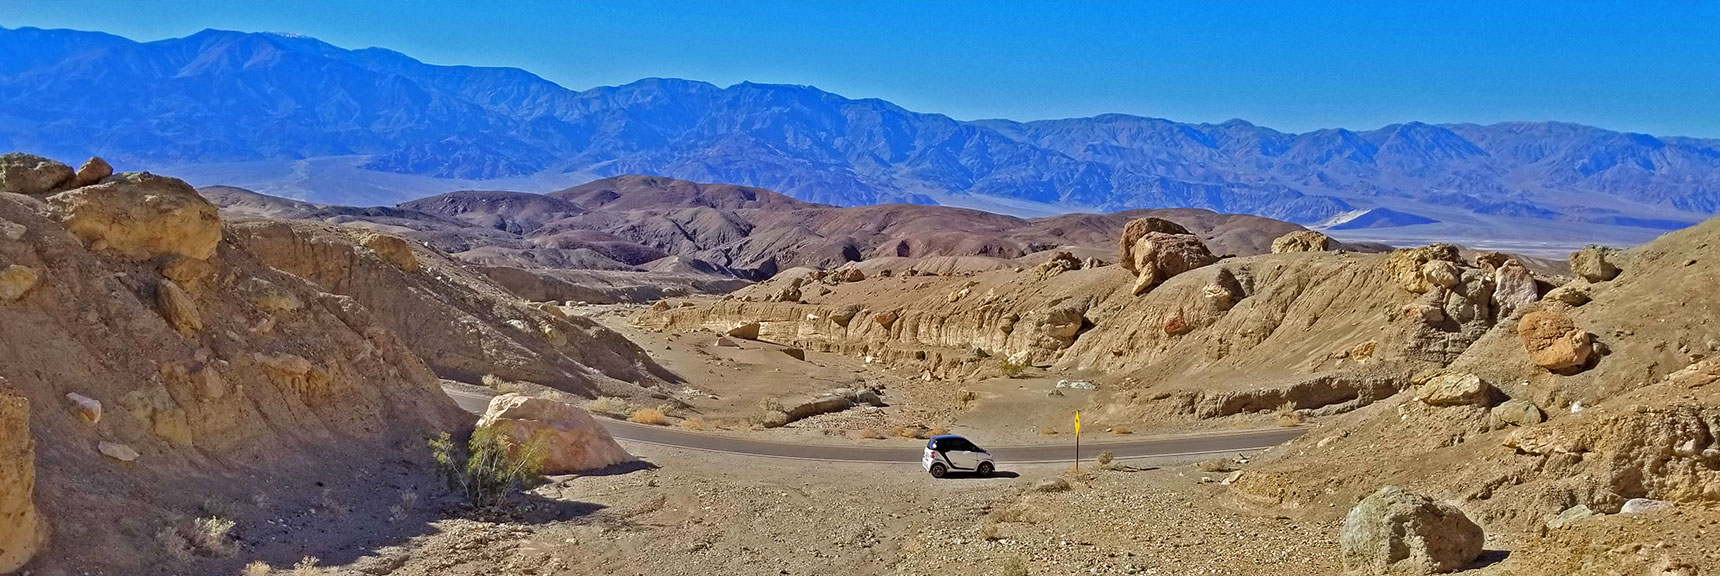 Parked at 2nd Dip Canyon | Artists Drive Hidden Canyon Hikes | Death Valley National Park, California